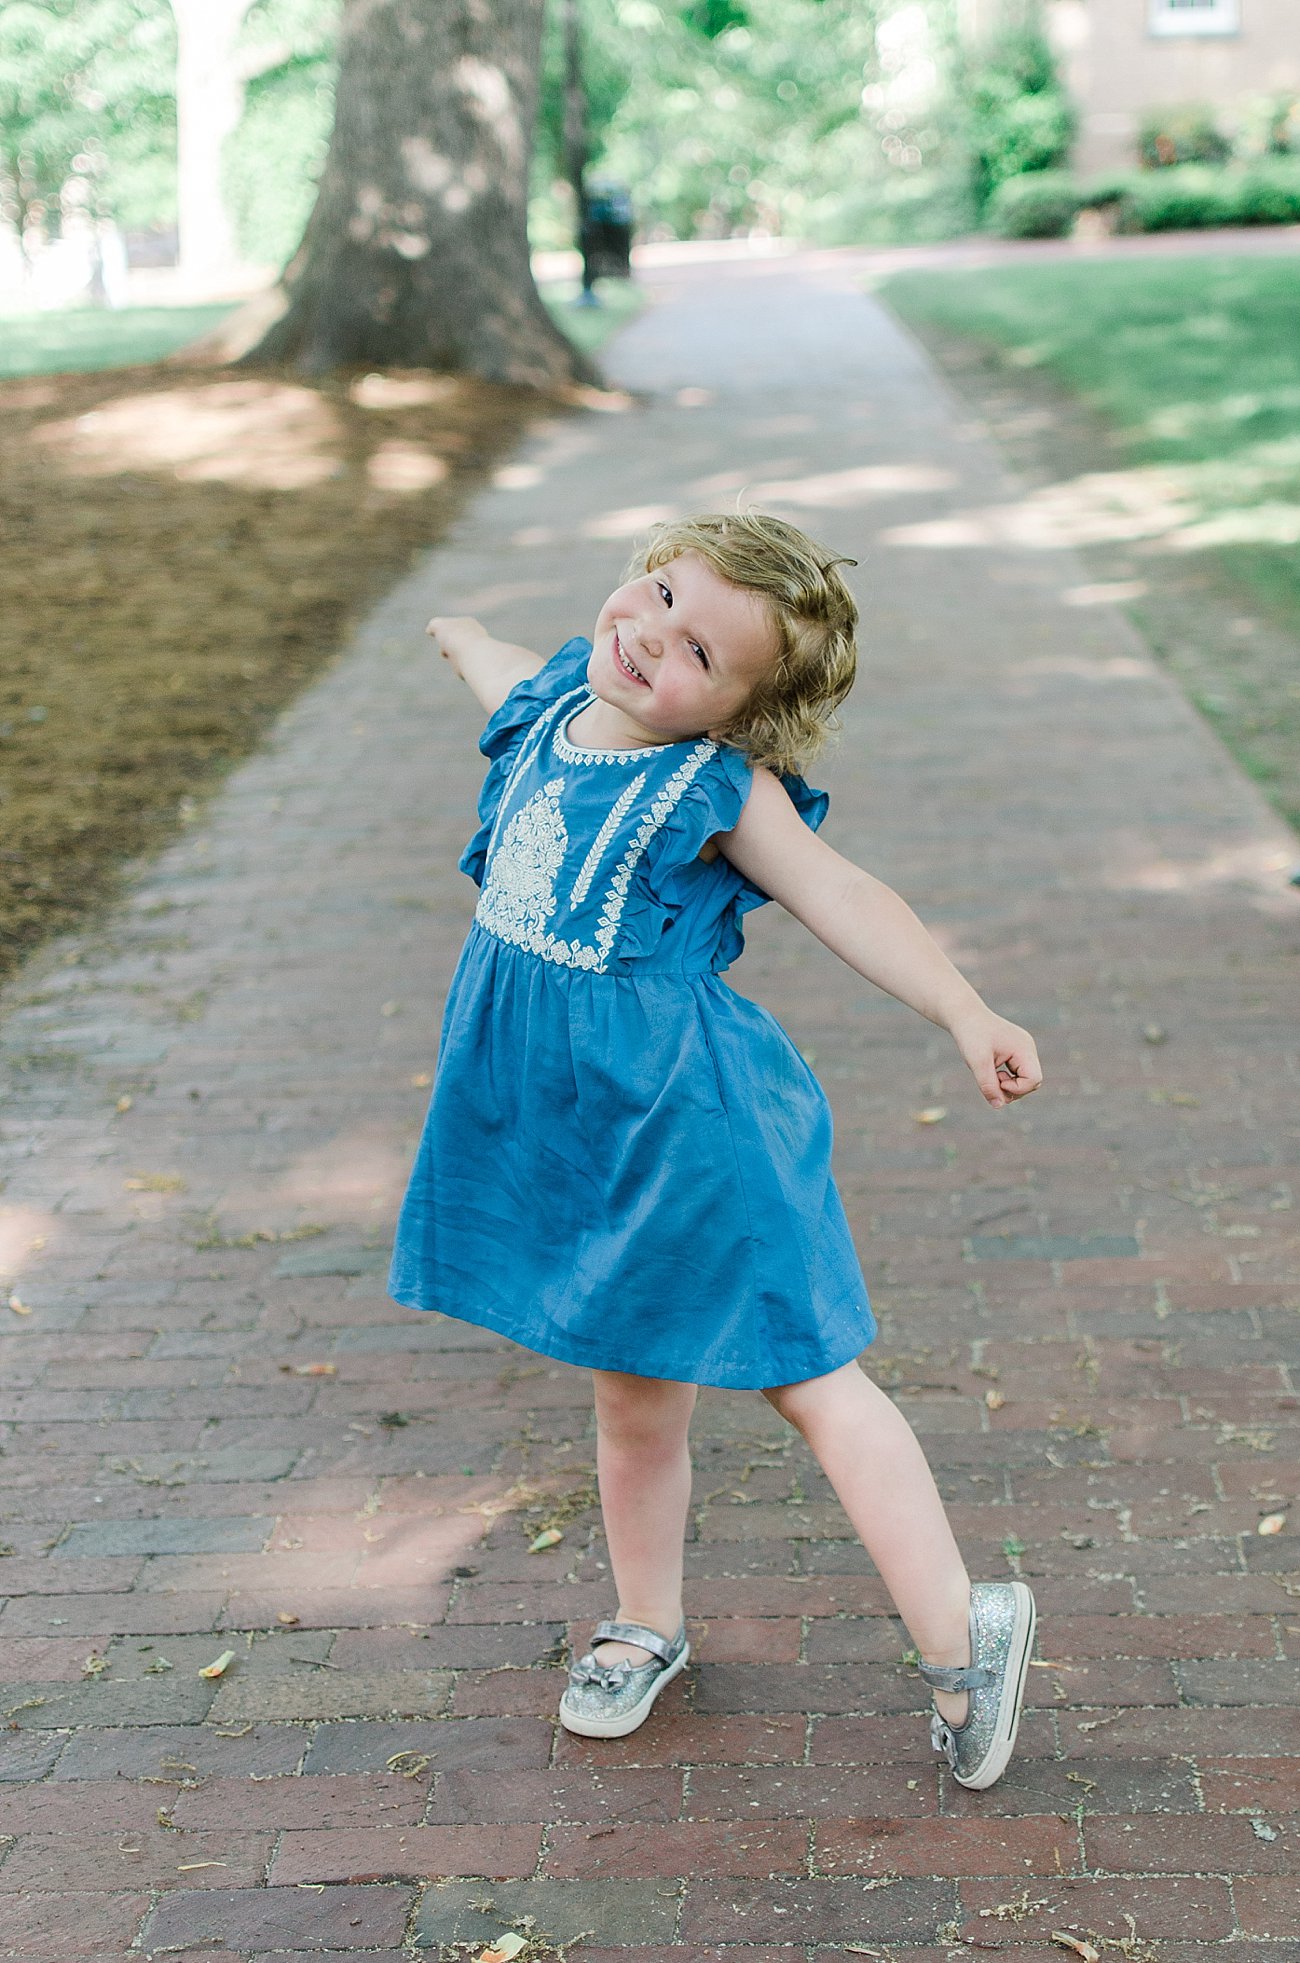 The Perfect Fair Trade Fashion Giveaway for the Little Girl in Your Life by ethical fashion blogger Still Being Molly